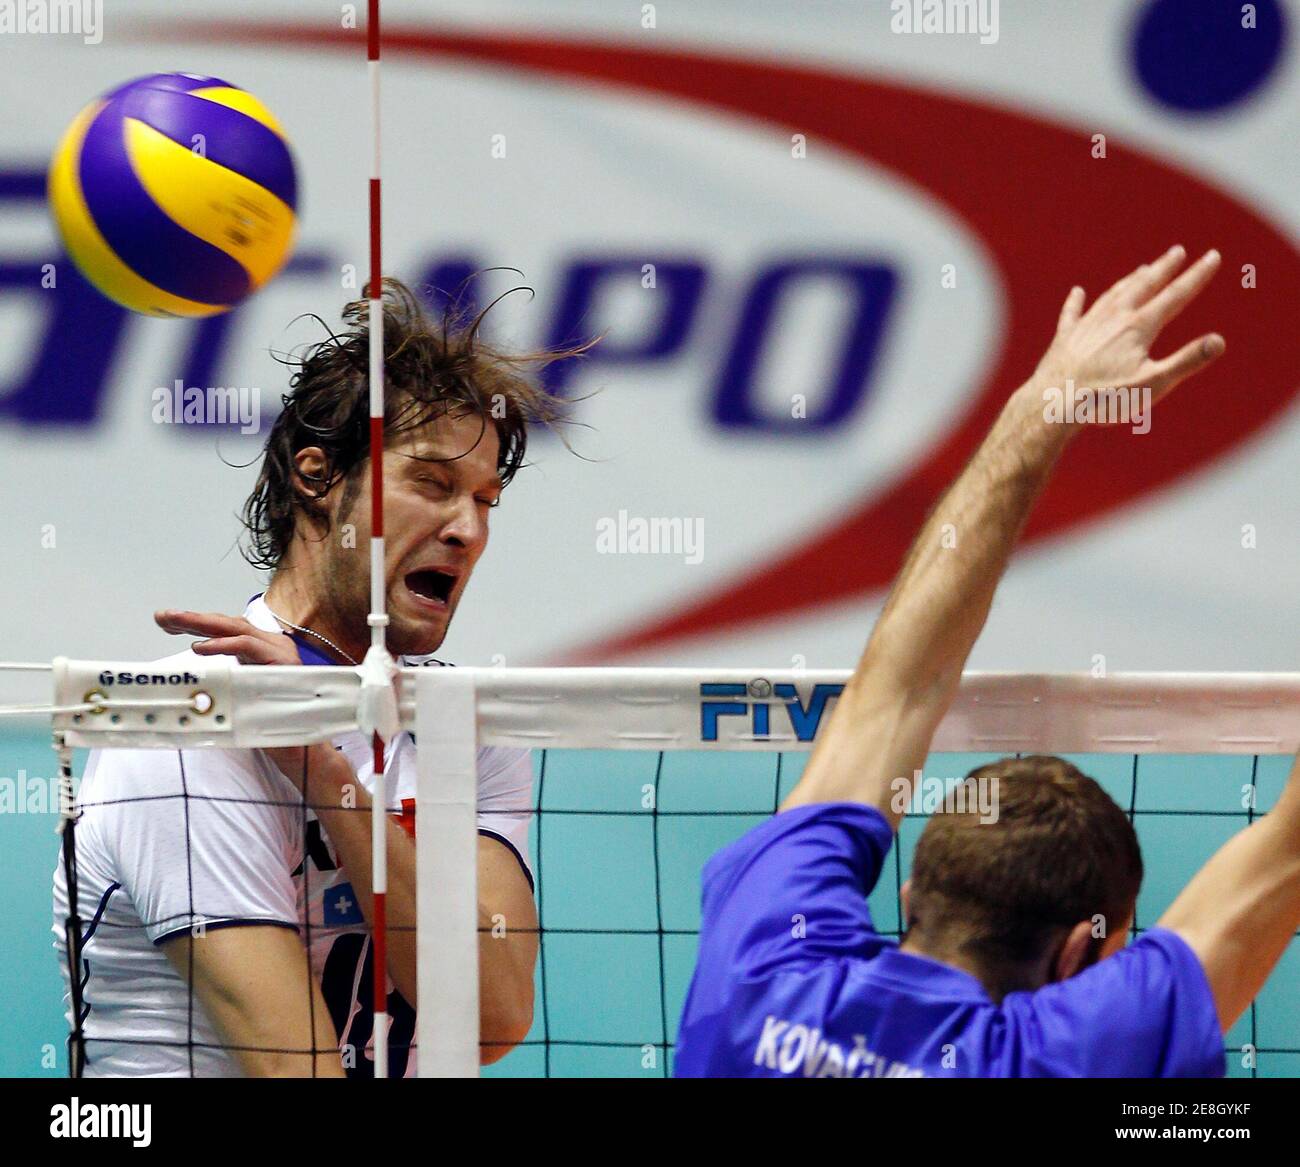 Italy's Matej Cernic (L) spikes the ball against Serbia's Nikola Kovacevic during their FIVB World League Pool-B intercontinental round volleyball match in Belgrade July 7, 2010. REUTERS/Ivan Milutinovic  (SERBIA - Tags: SPORT VOLLEYBALL) Stock Photo